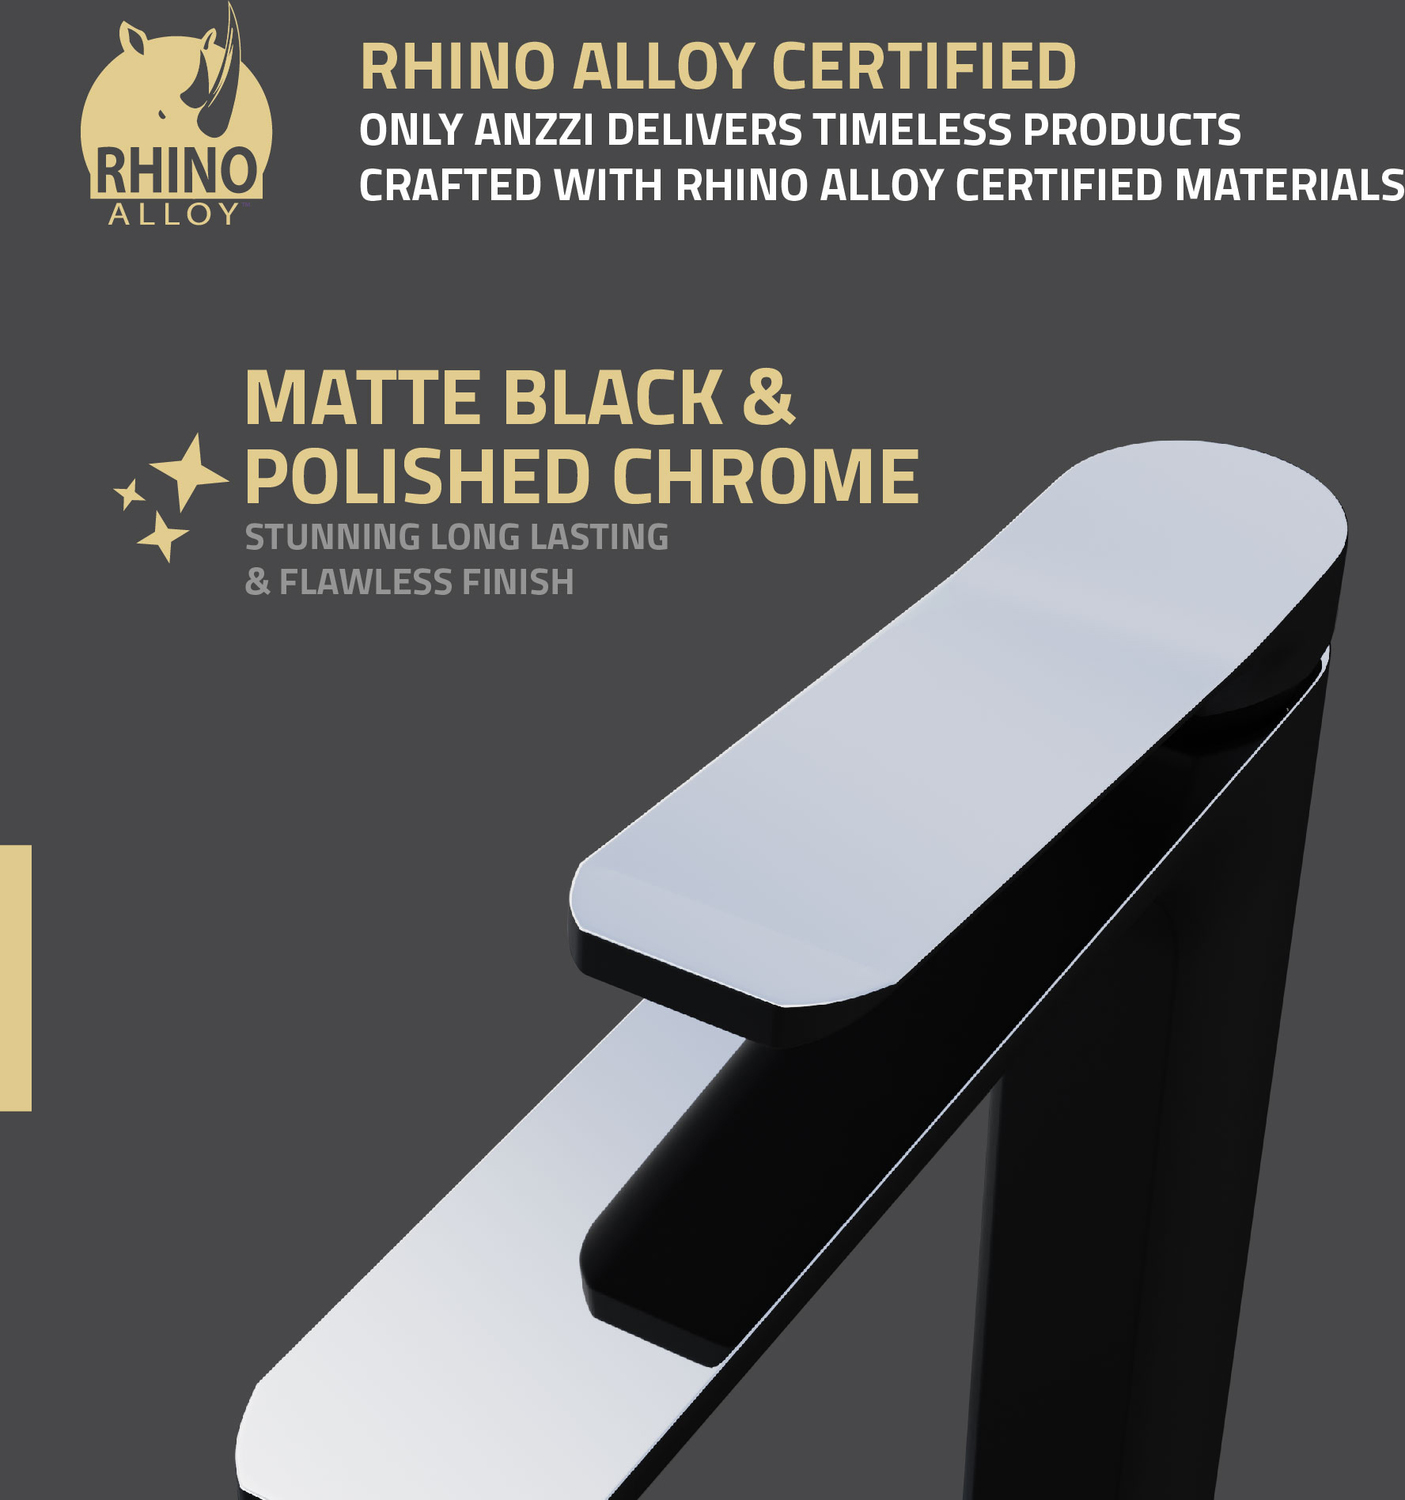 bathroom sink faucets brushed nickel Anzzi BATHROOM - Faucets - Bathroom Sink Faucets - Single Hole Black